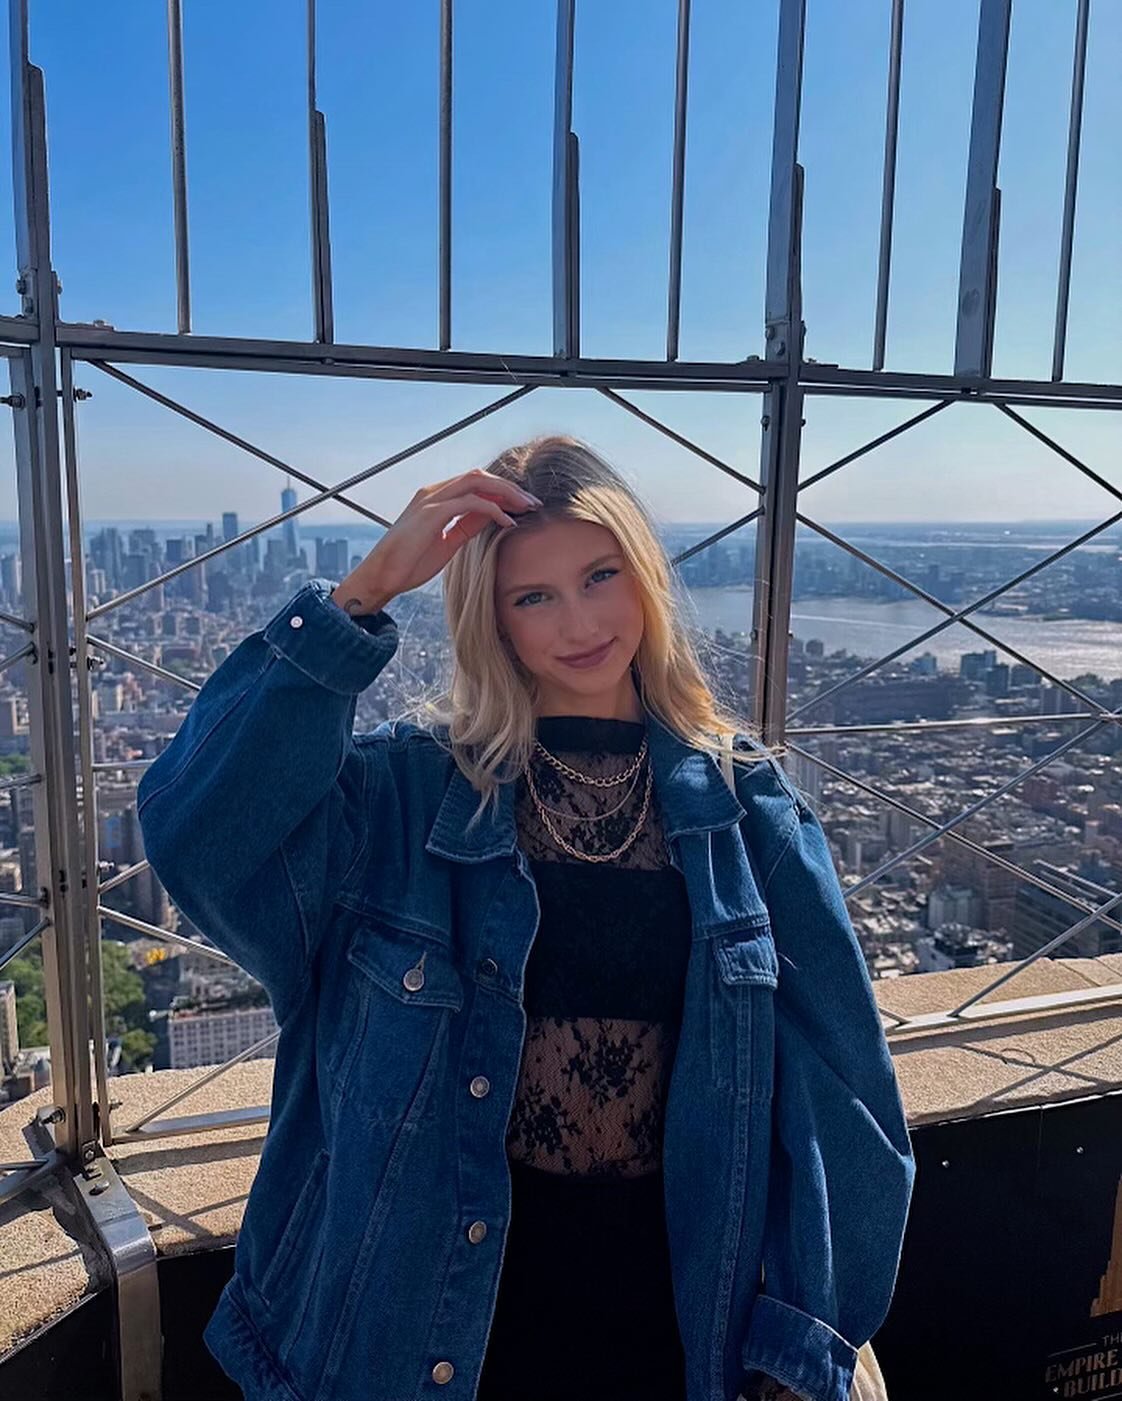 #MEMBERMONDAY and we&rsquo;re celebrating Ashtyn Riegert&rsquo;s exciting new chapter! 🌴 

Ashtyn recently landed a fantastic position with Gilli as a Trade Show Sales Associate and will be relocating to sunny Los Angeles, CA to join the LELIS team 